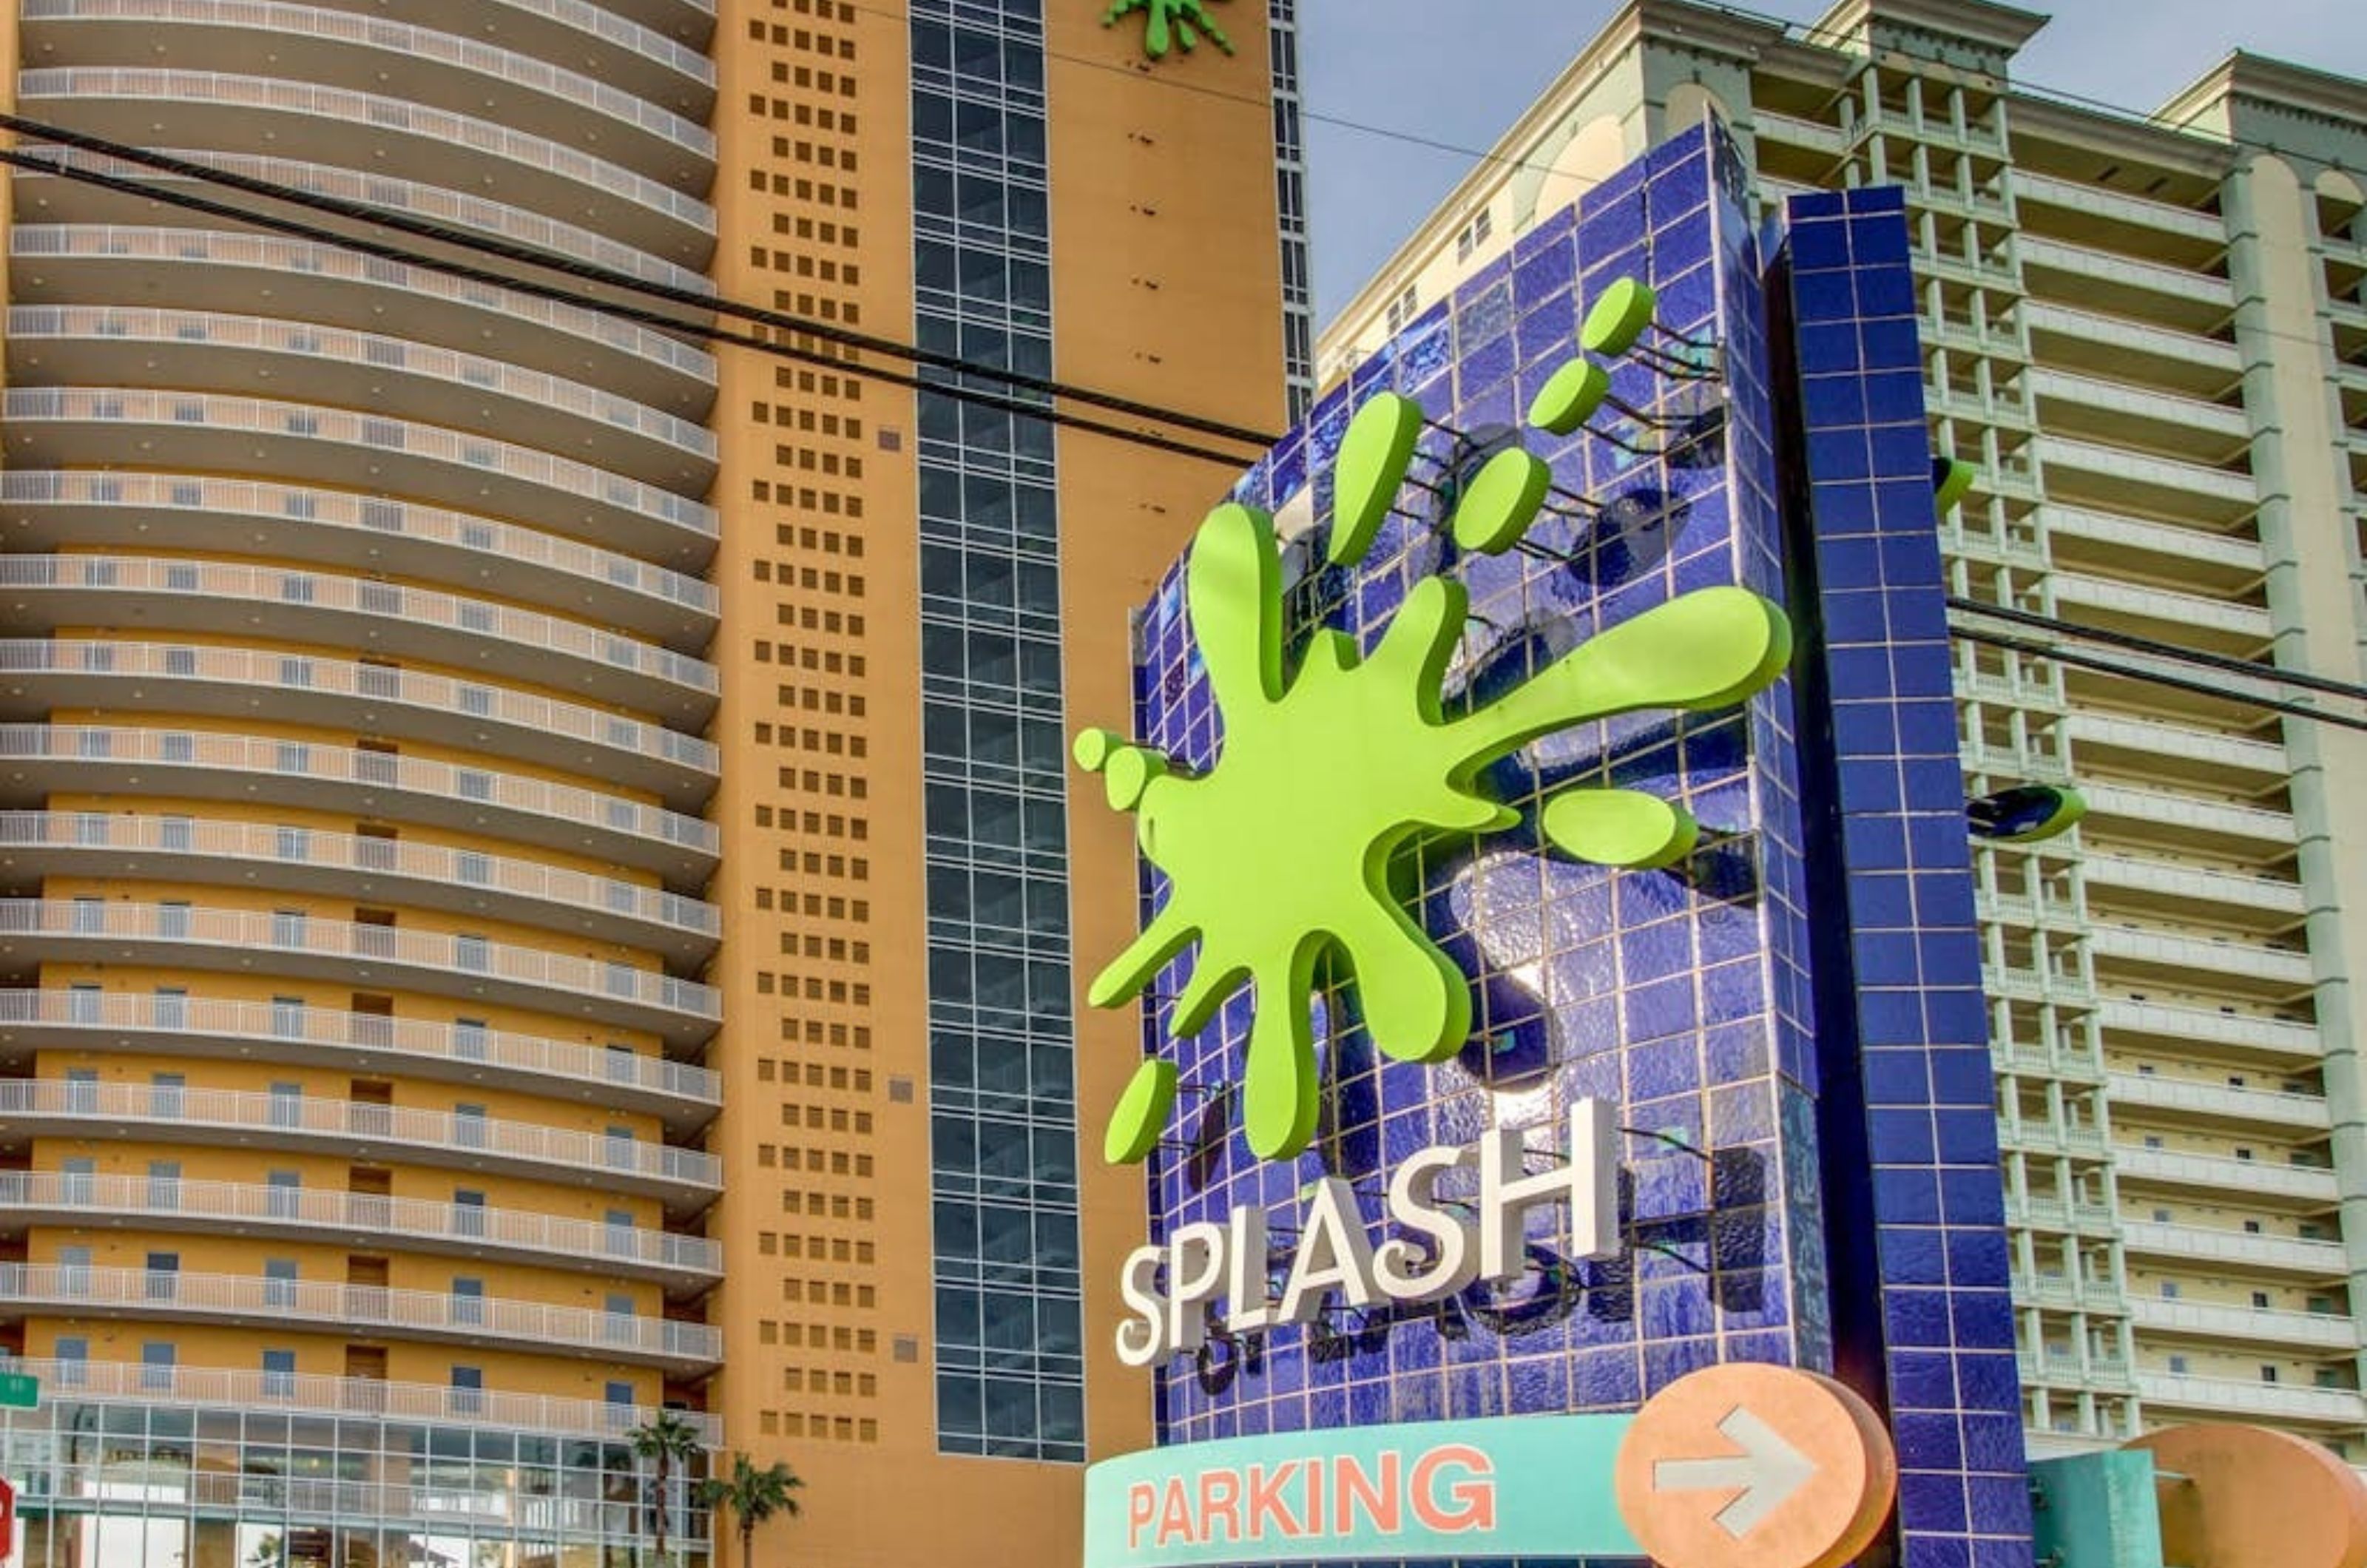 The property's sign in front of one of the high-rises at Splash Resort in Panama City Beach Florida 